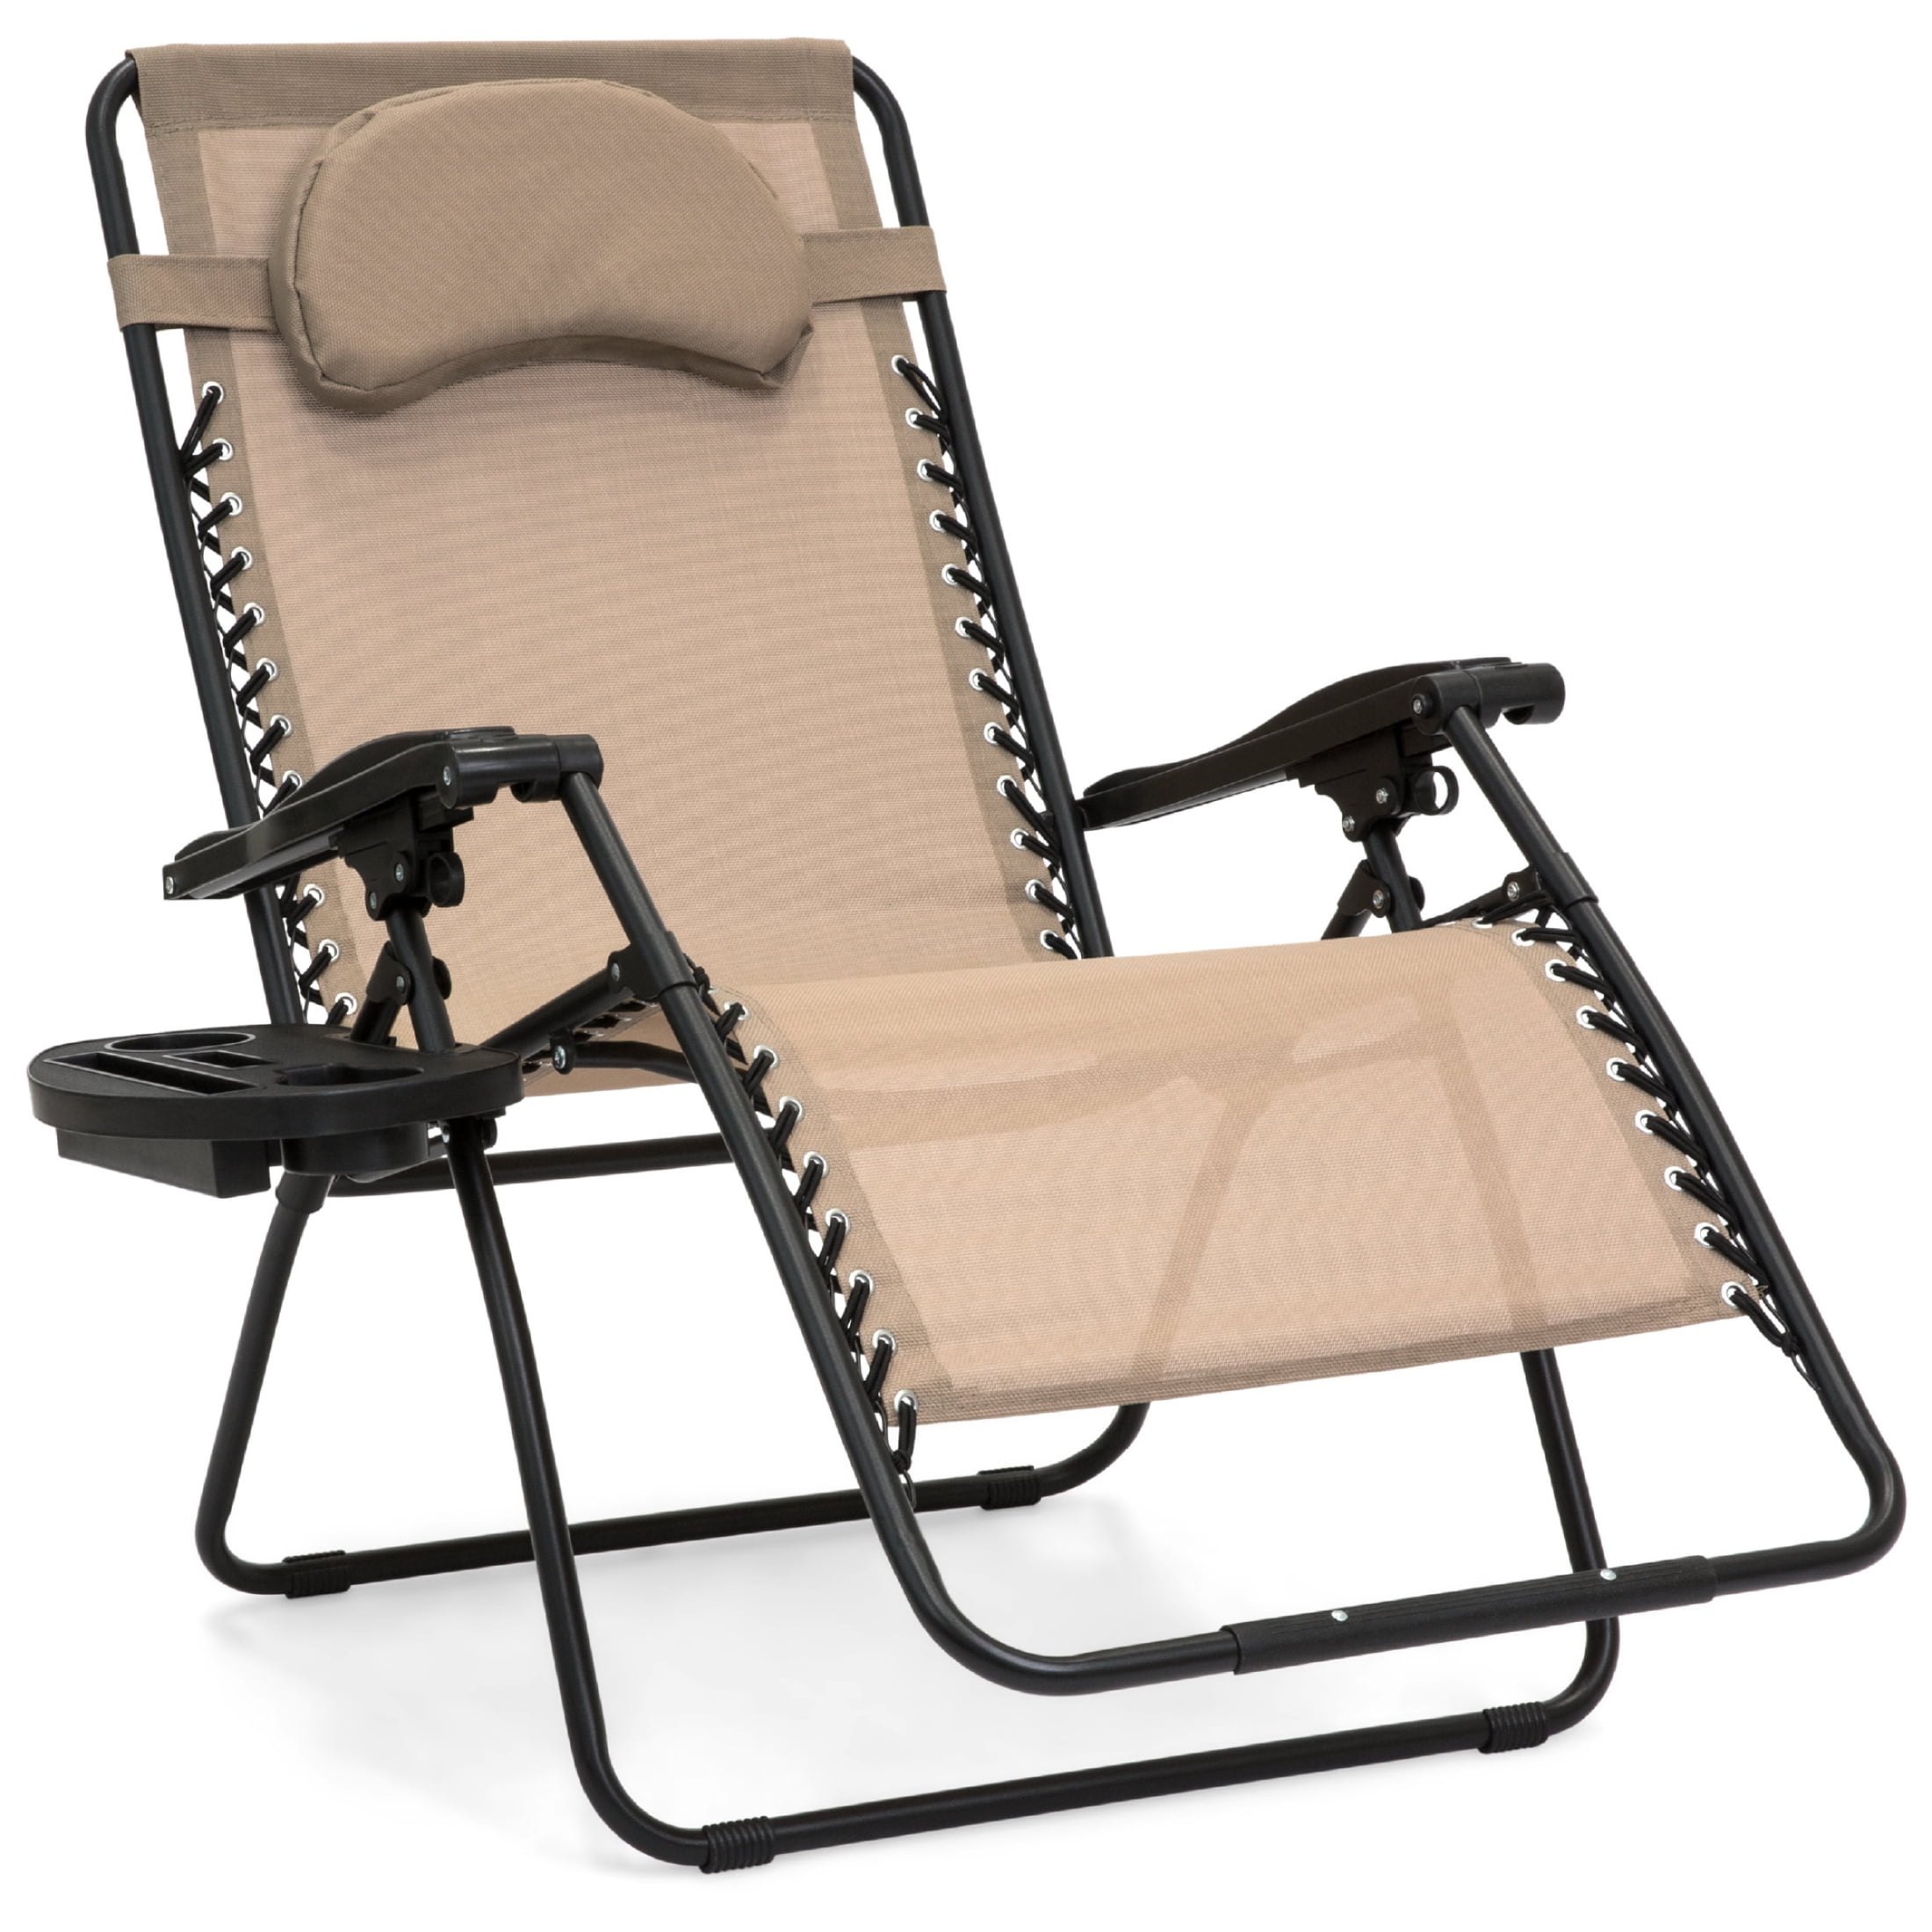 Best Choice Products Oversized Zero Gravity Chair, Folding Recliner w/ Removable Cushion, Side Tray - Fossil Gray